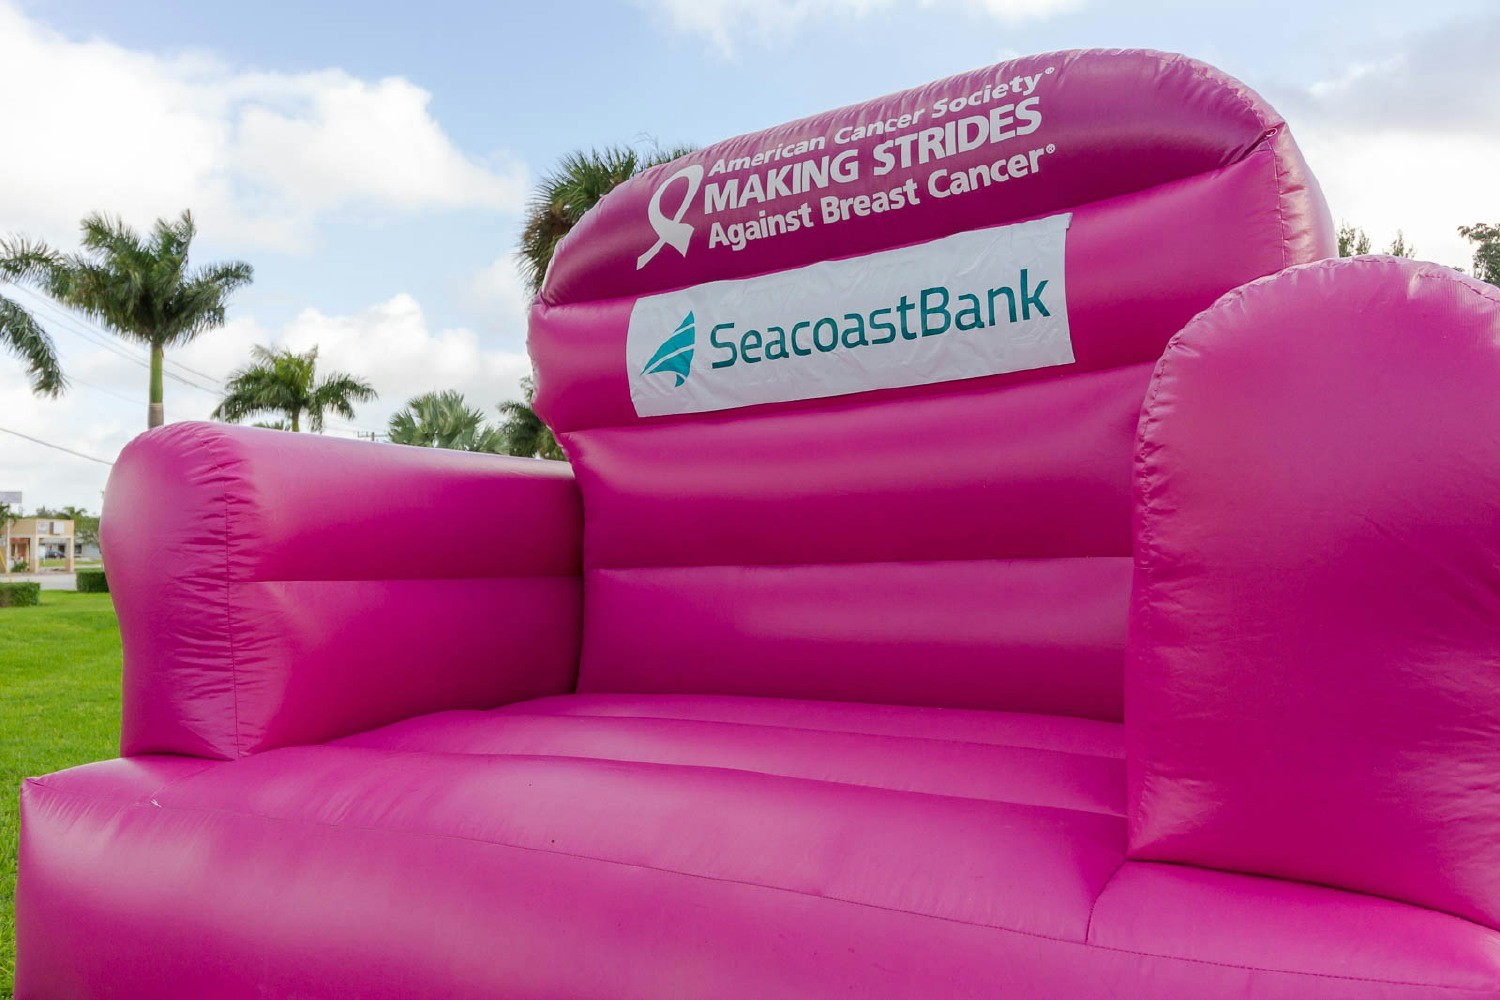 Partnership with American Cancer Society's Making Strides Against Breast Cancer.